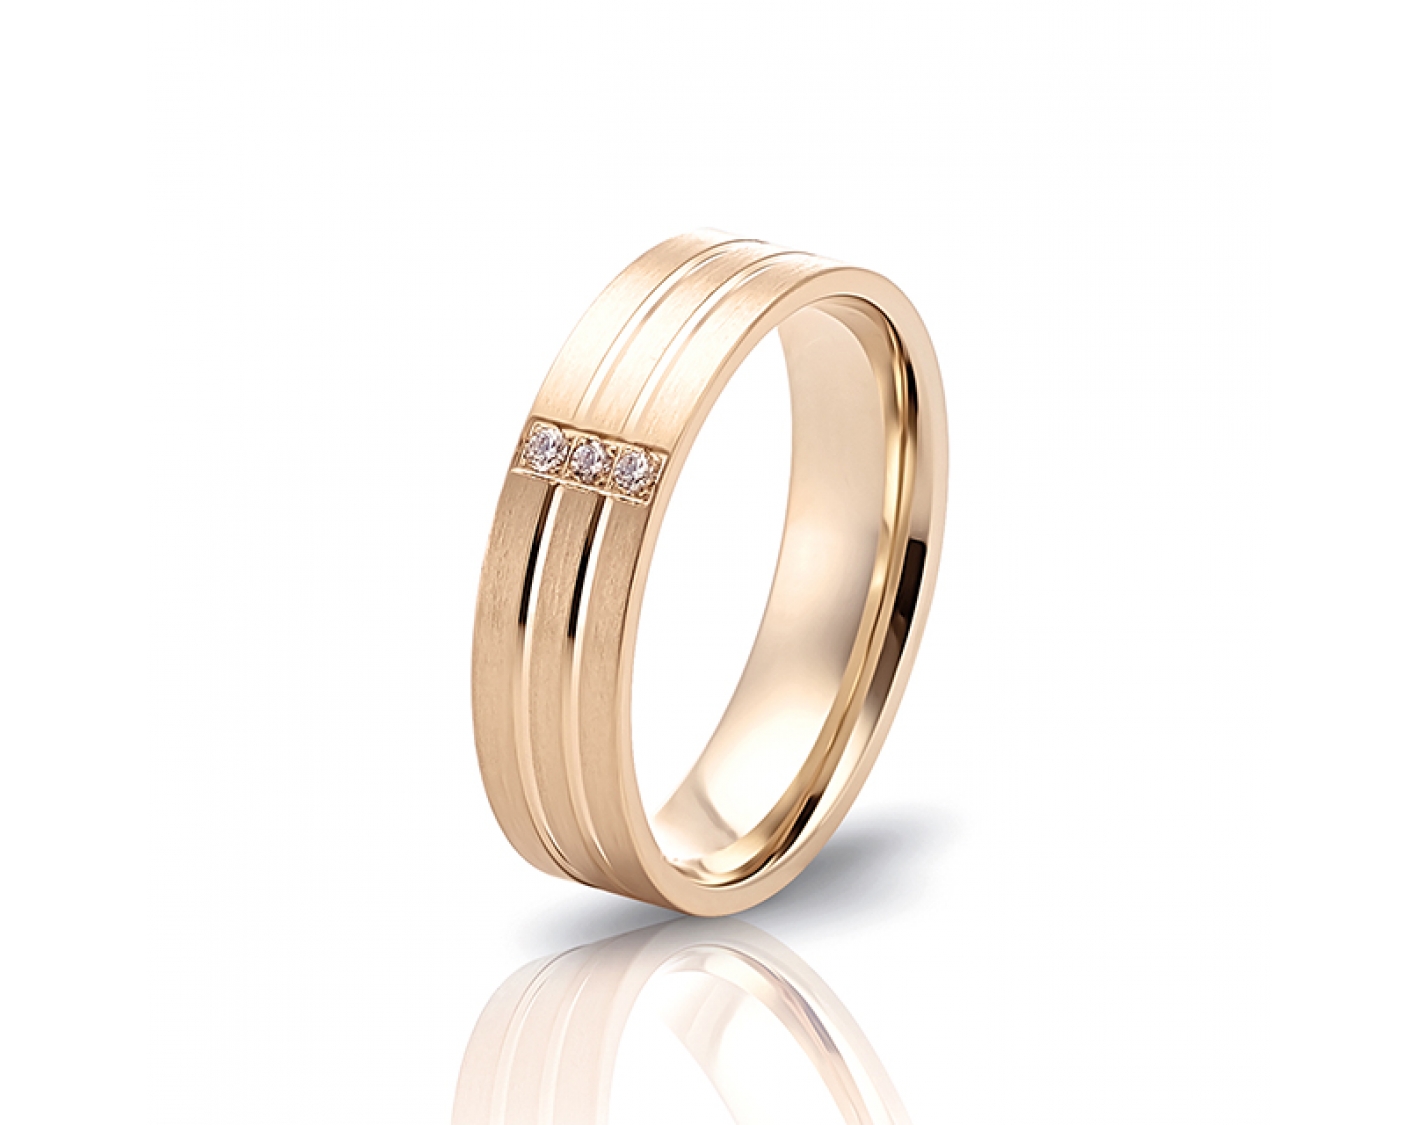 18k rose gold 5mm matte wedding band with two shiny lines and diamonds